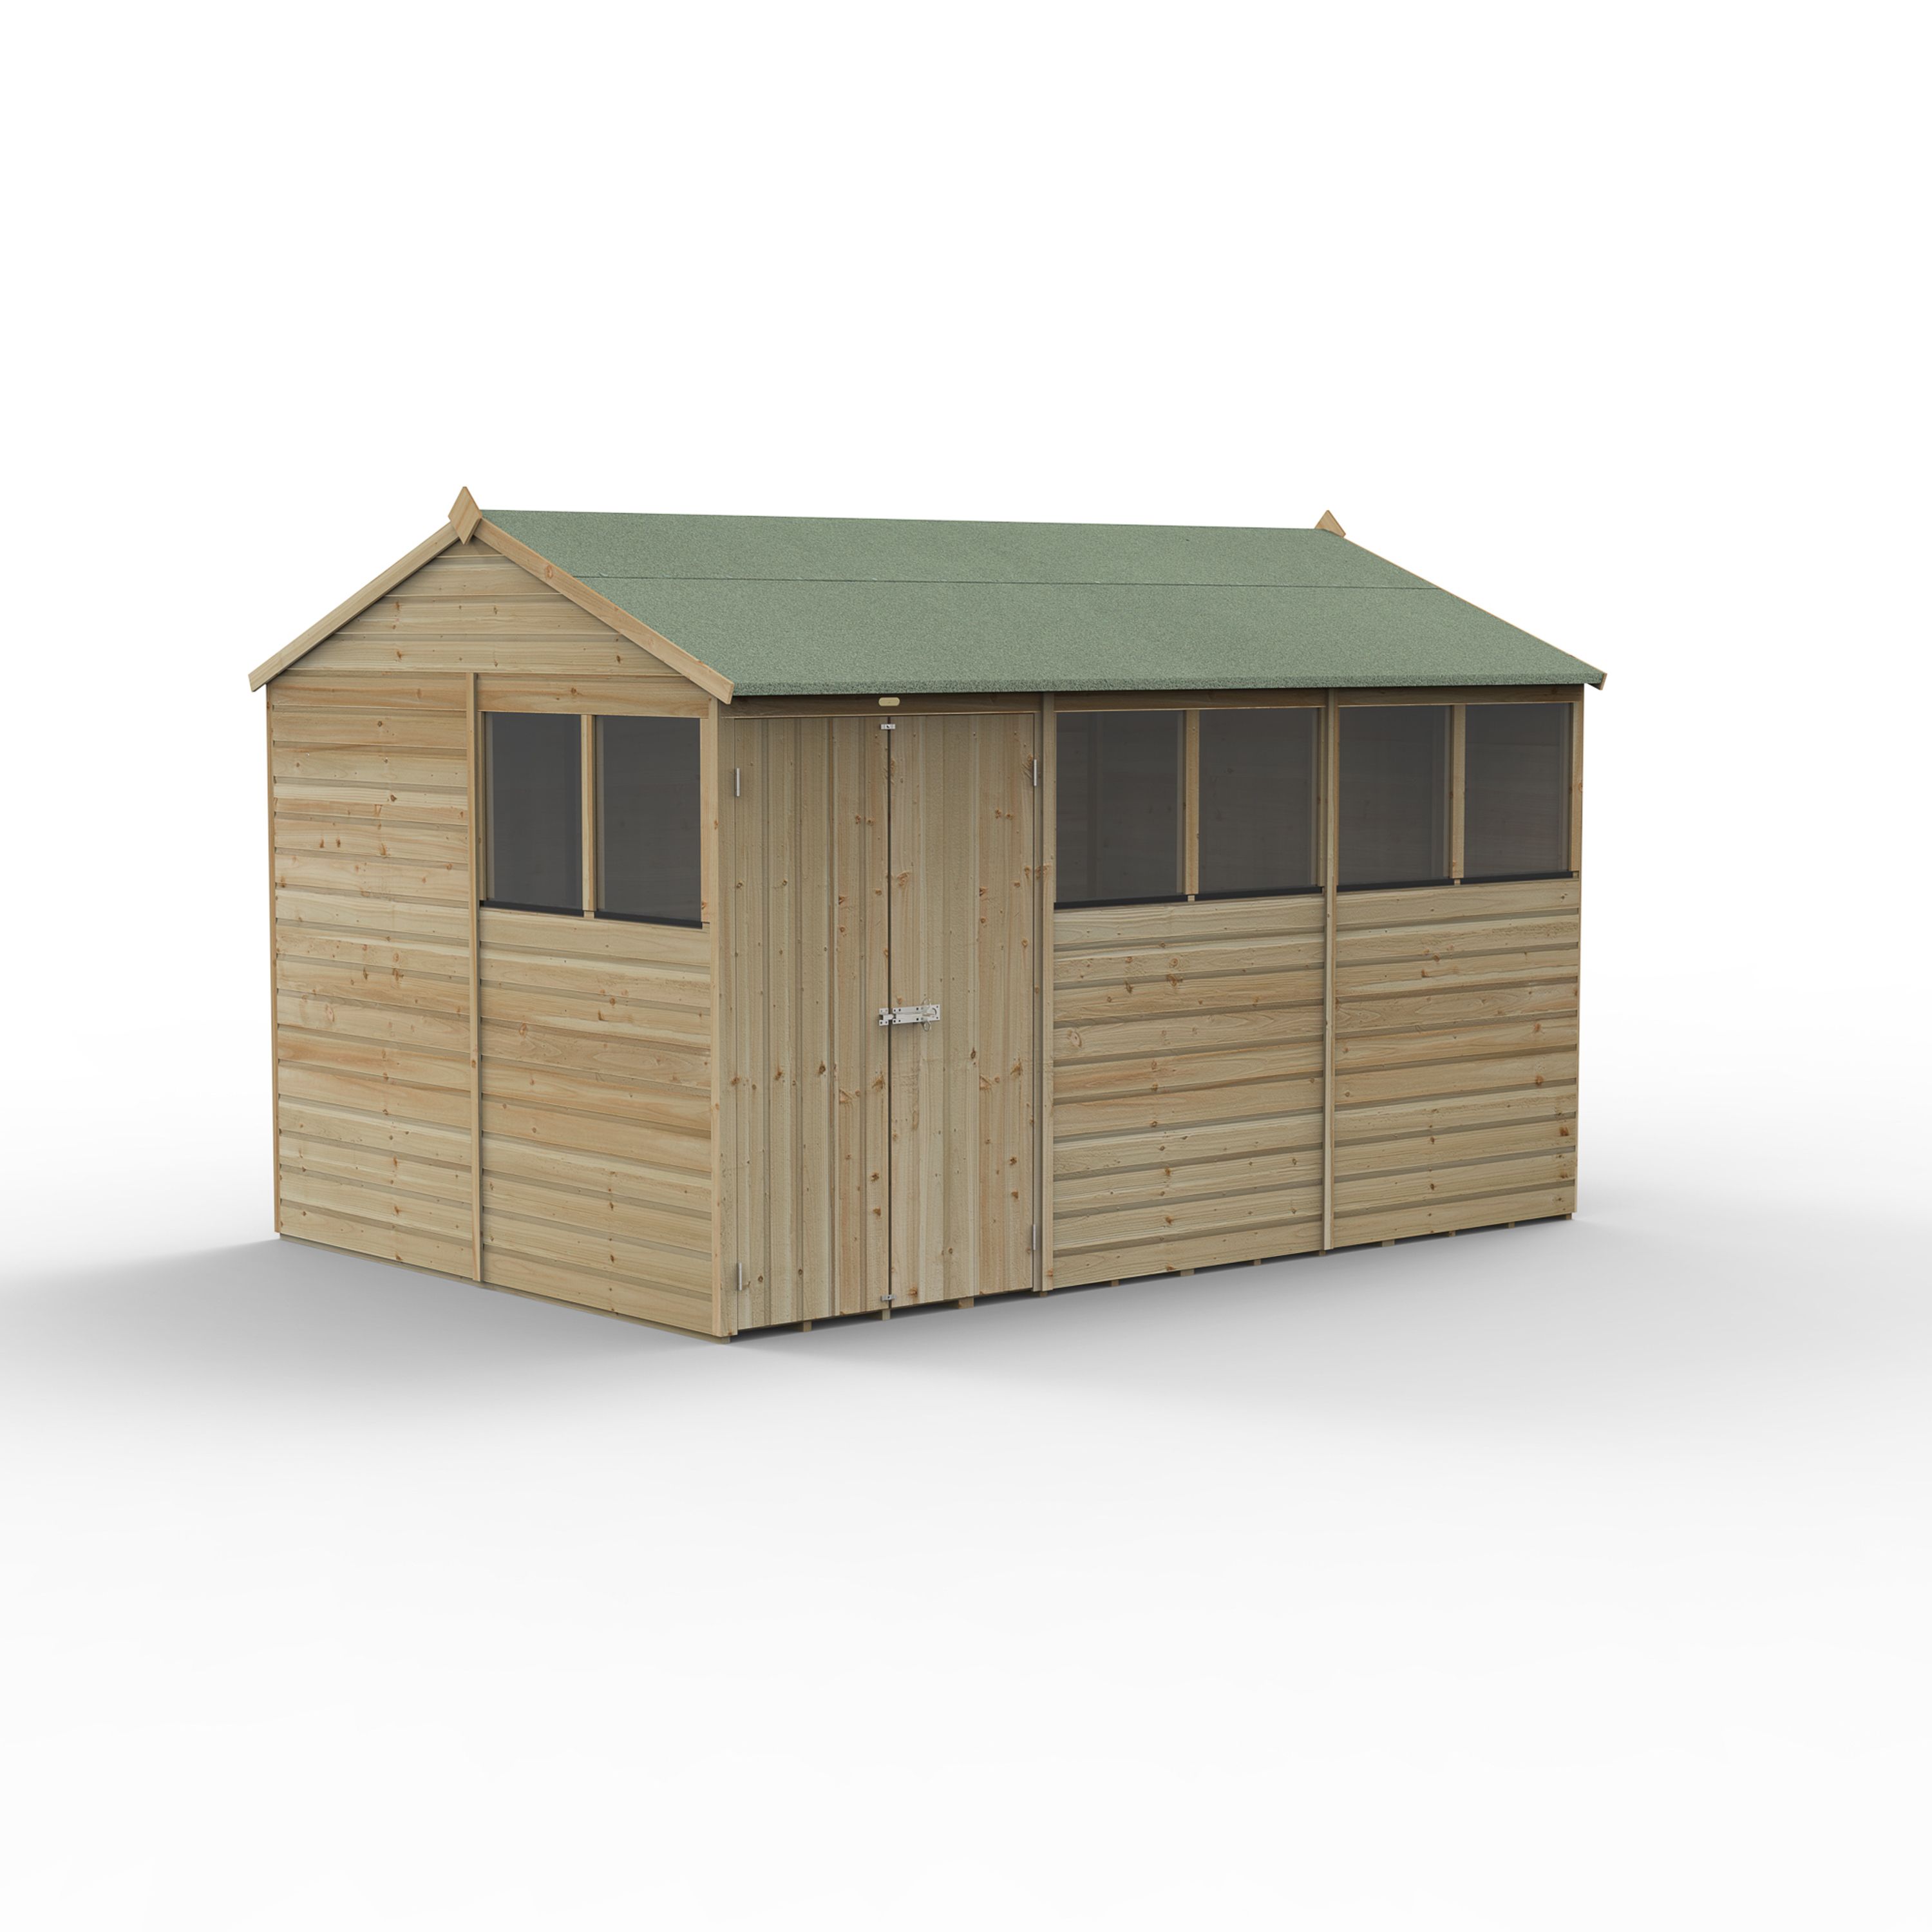 Forest Garden Beckwood 12x8 ft Reverse apex Natural timber Wooden 2 door Shed with floor & 6 windows (Base included) - Assembly not required